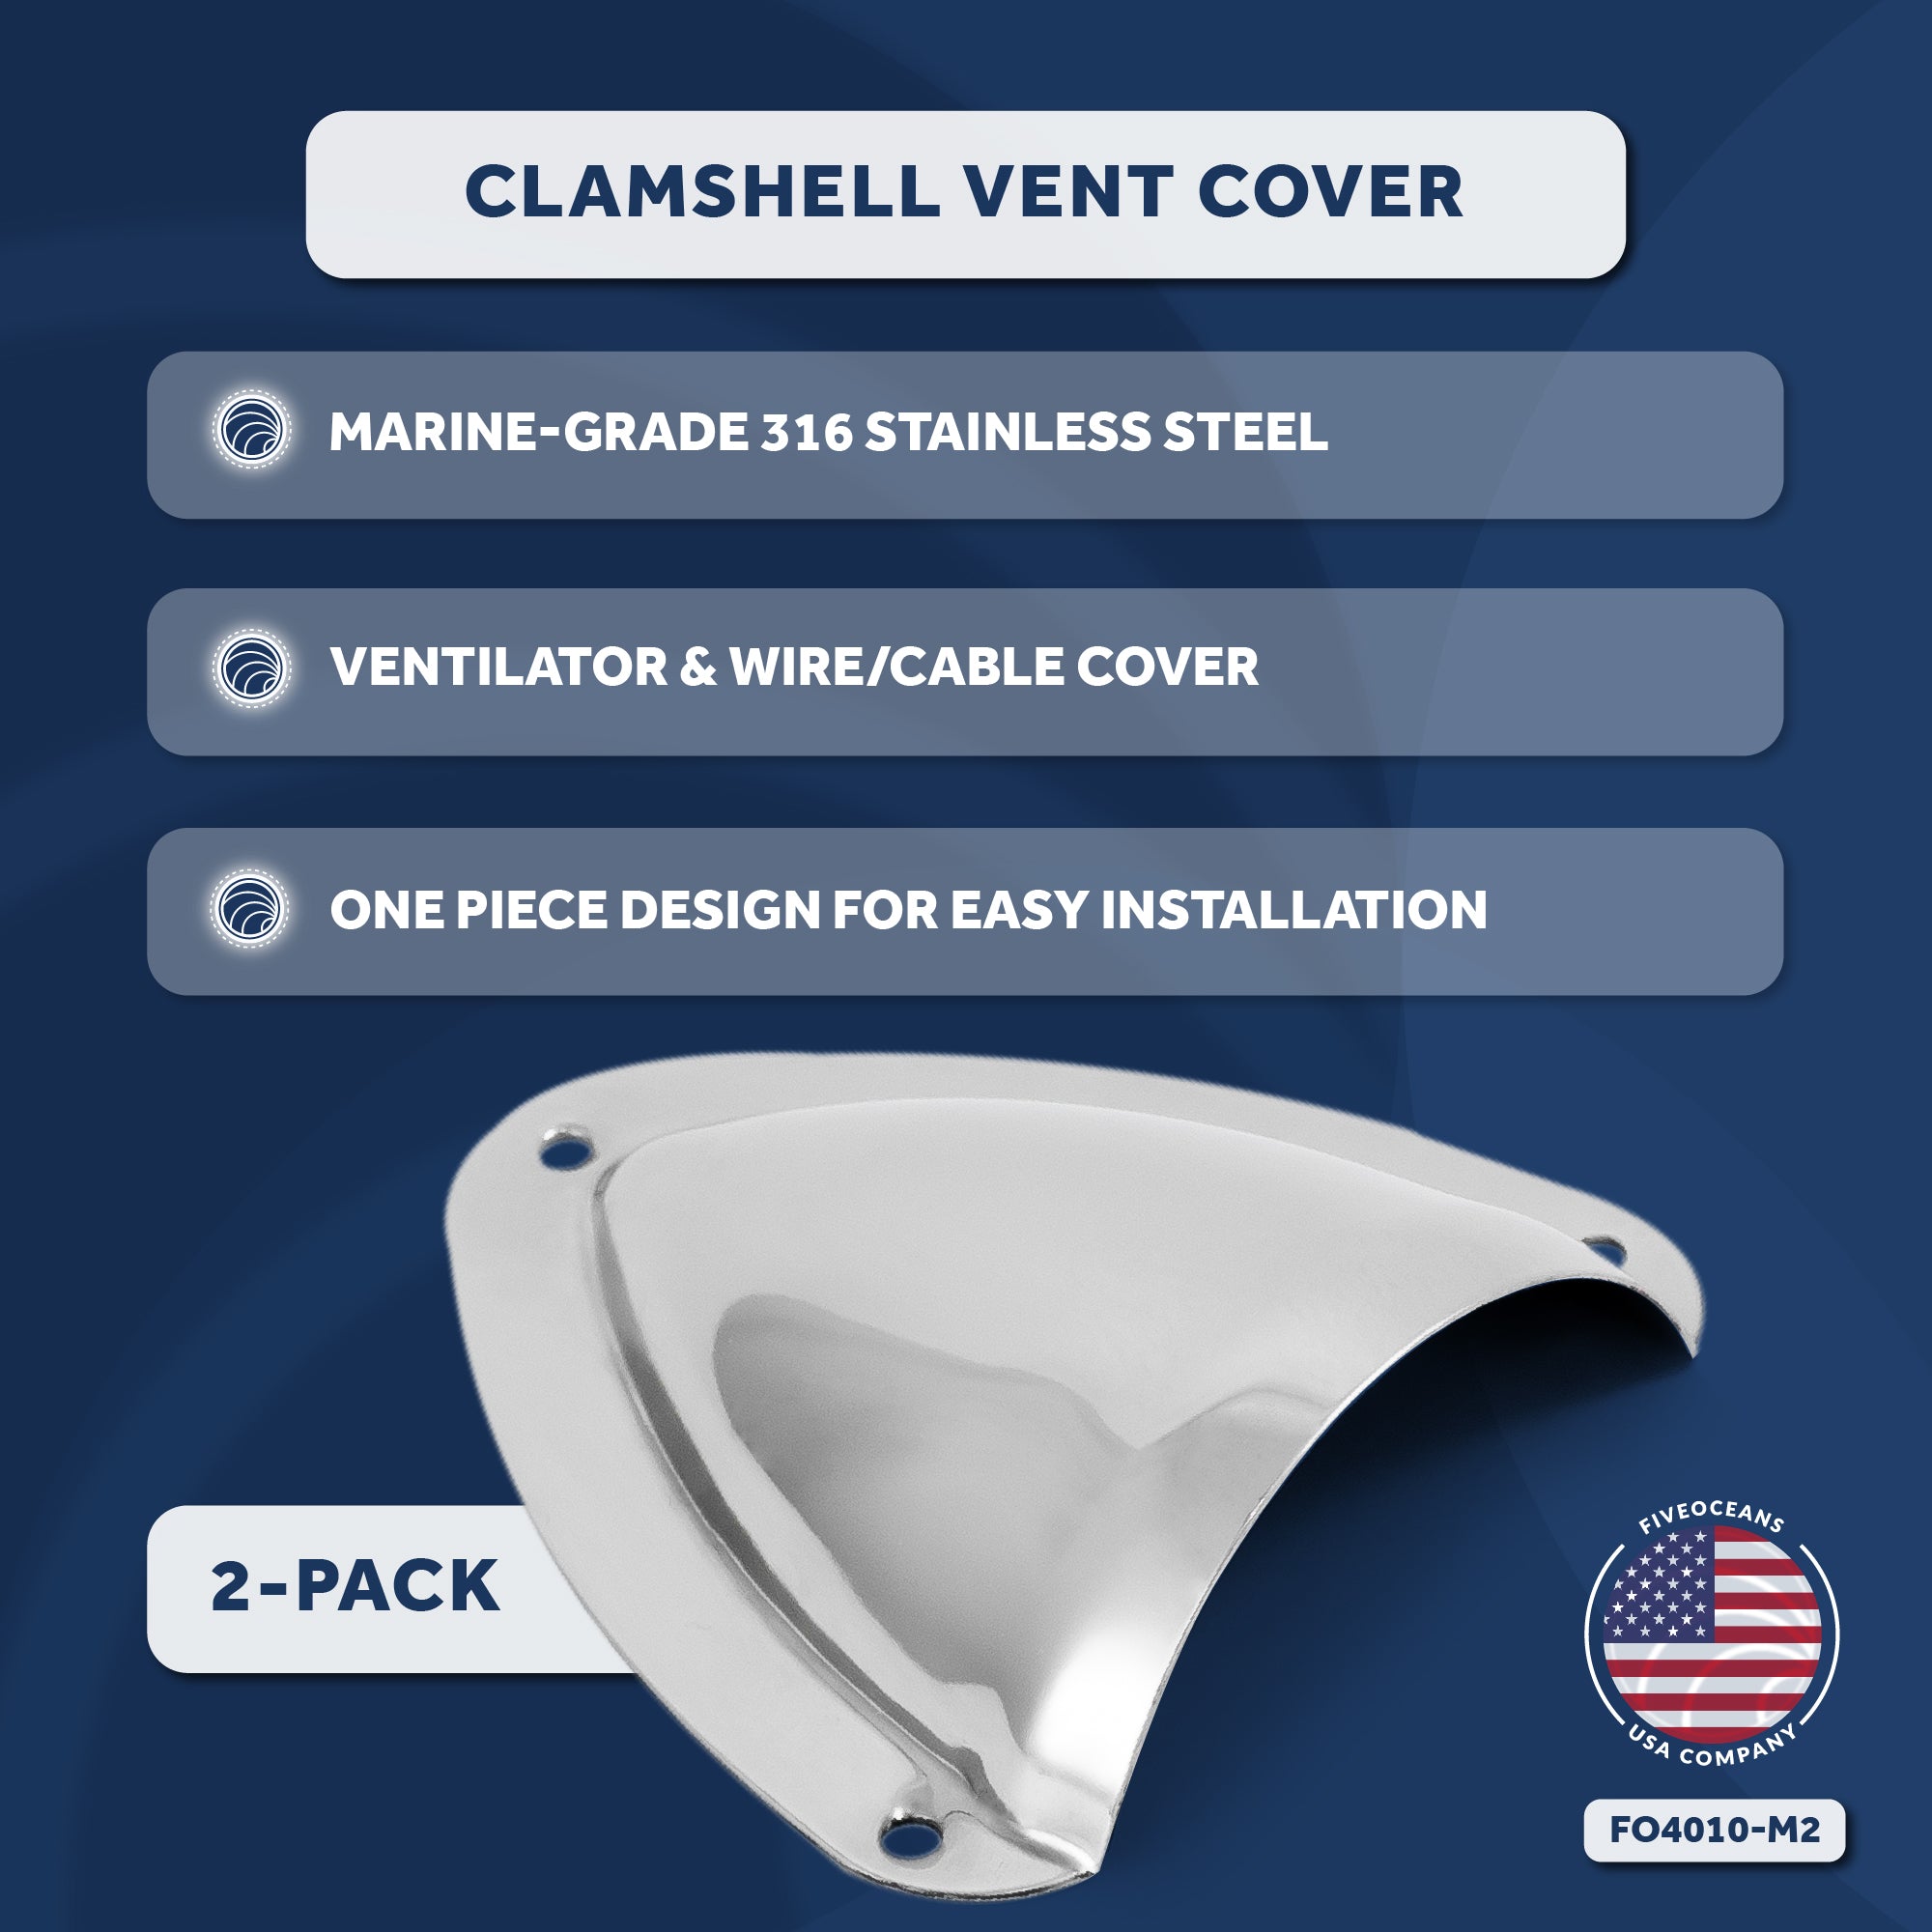 Clamshell Vent Cover, Base 3-11/16" L x 3-7/16" W, Stainless Steel - 2-Pack - FO4010-M2